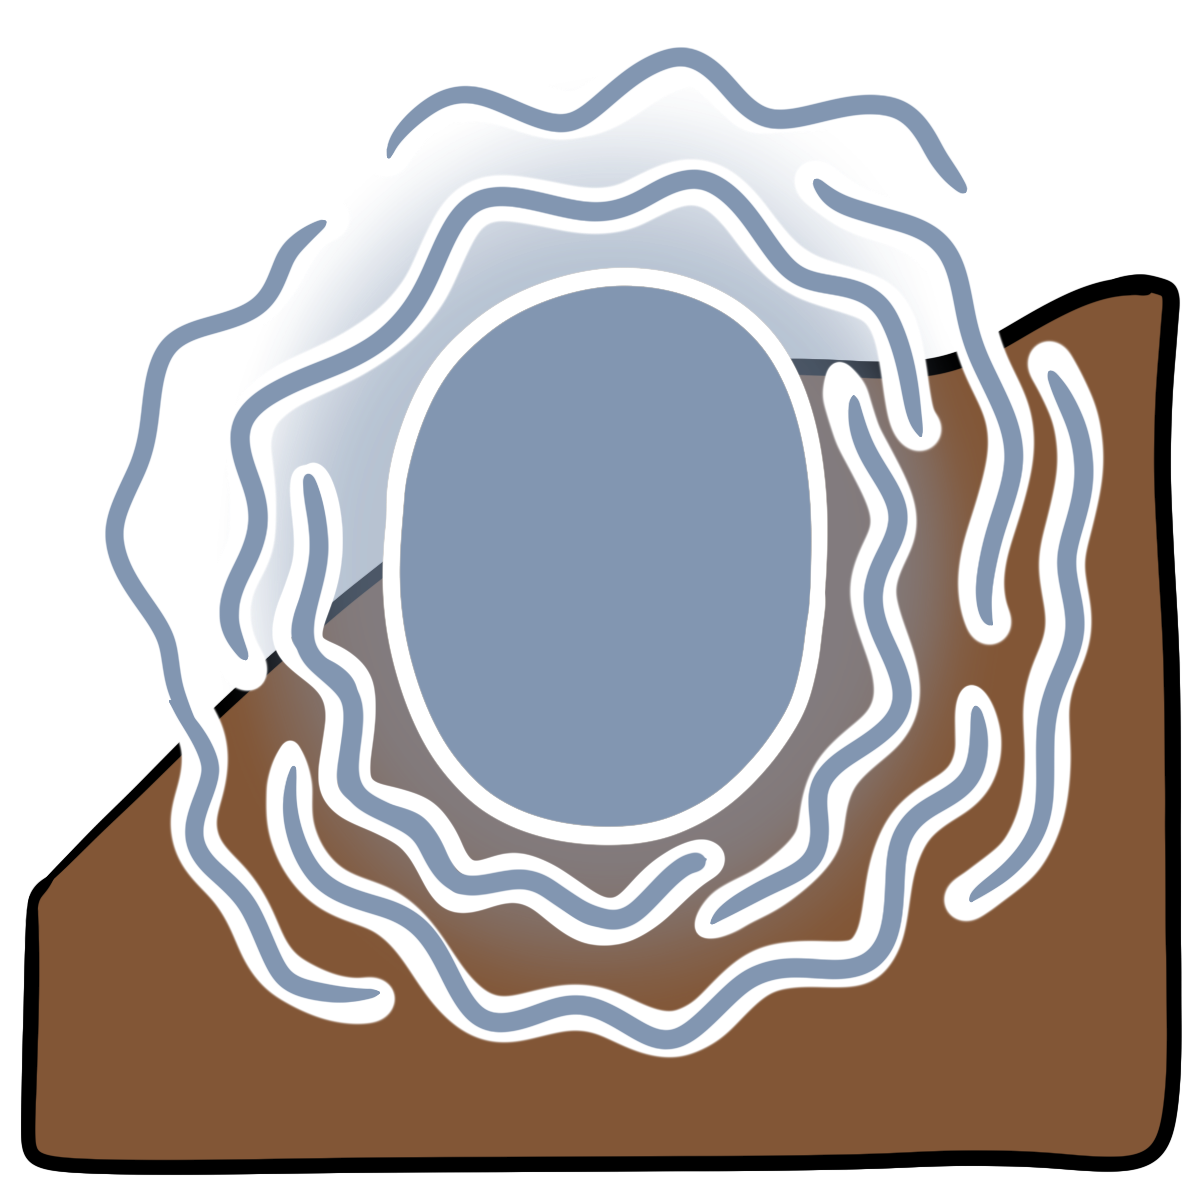 A light blue glowing oval surrounded by squiggly lines. Curved medium brown skin fills the bottom half of the background.